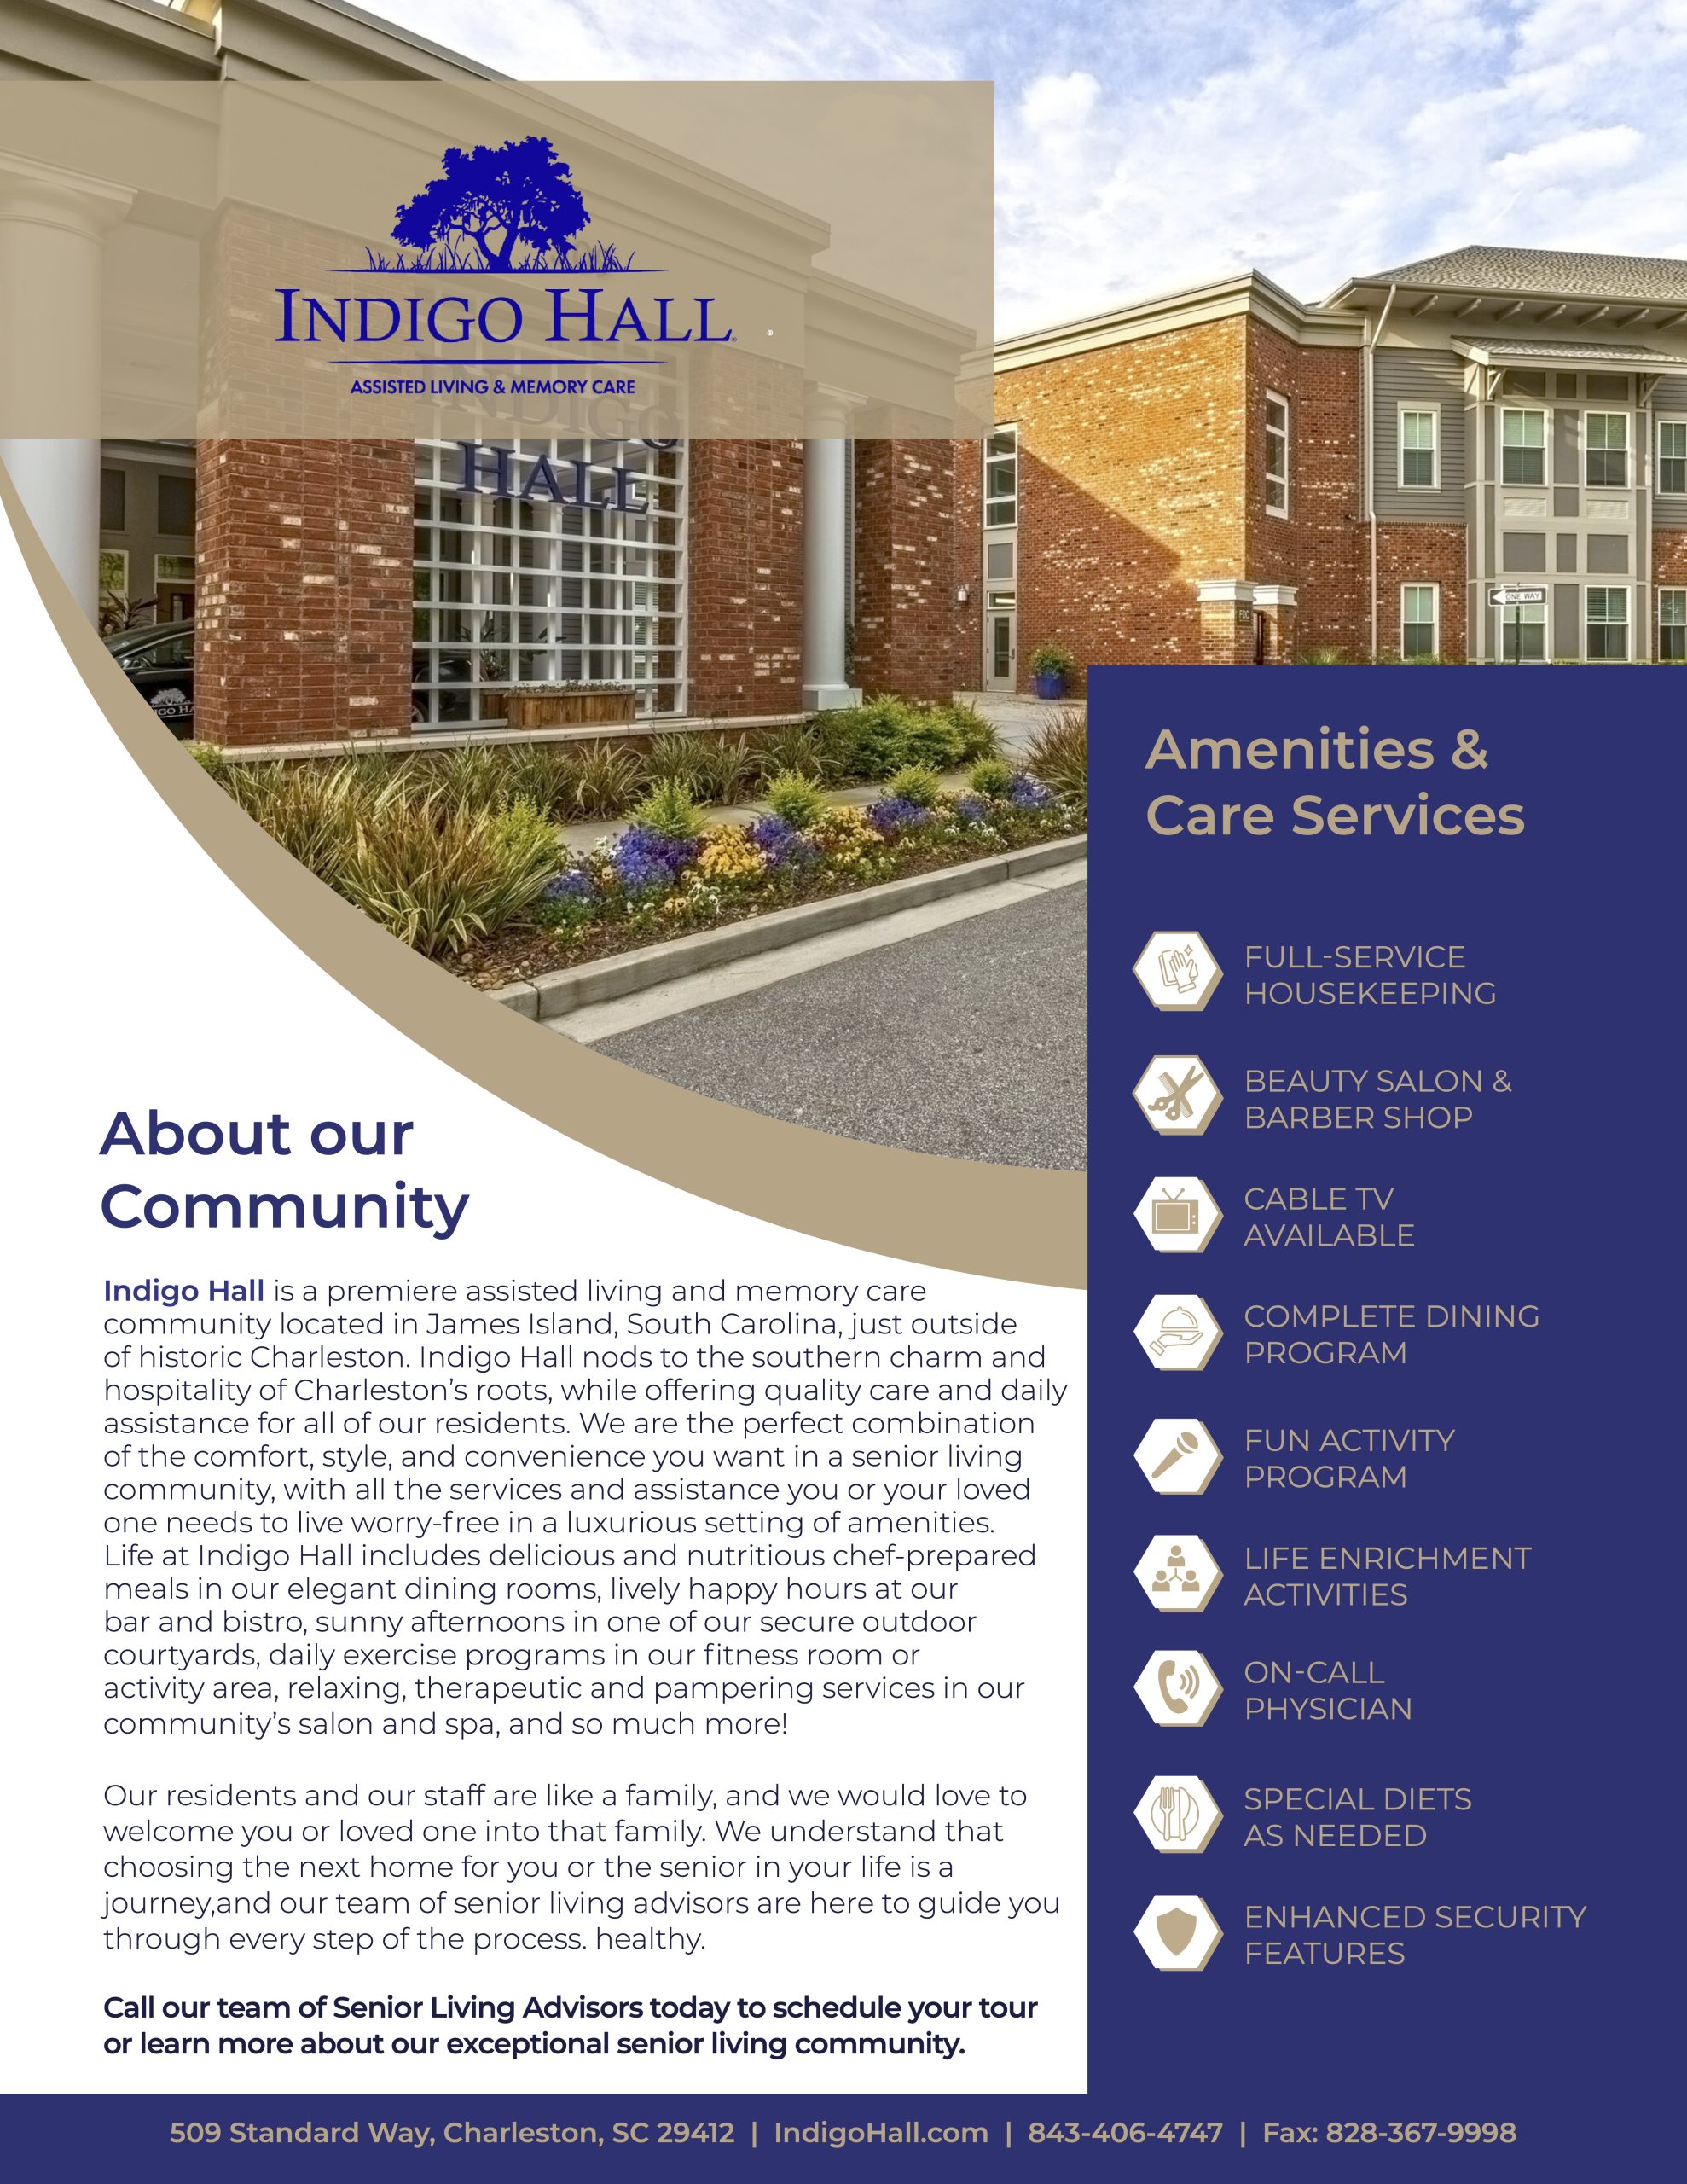 Indigo Hall- About our Services